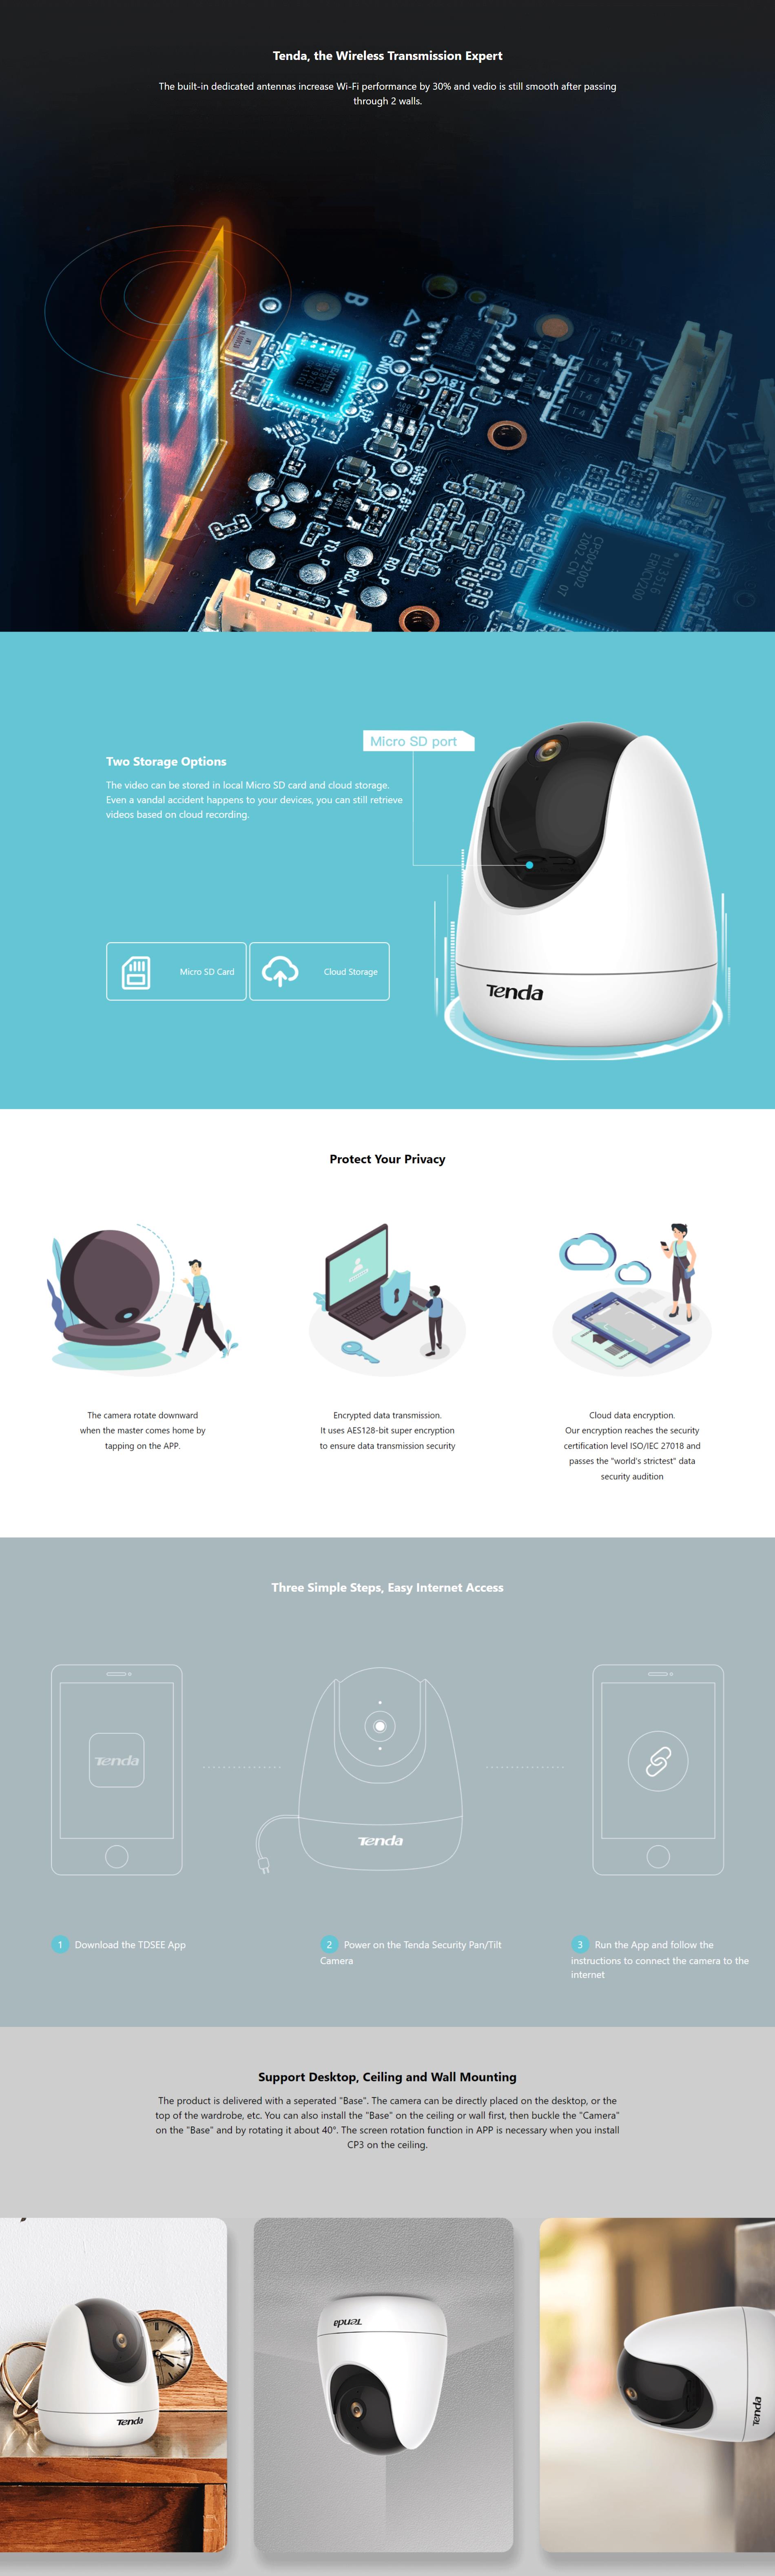 A large marketing image providing additional information about the product Tenda CP3 HD Wireless Security Camera - Additional alt info not provided